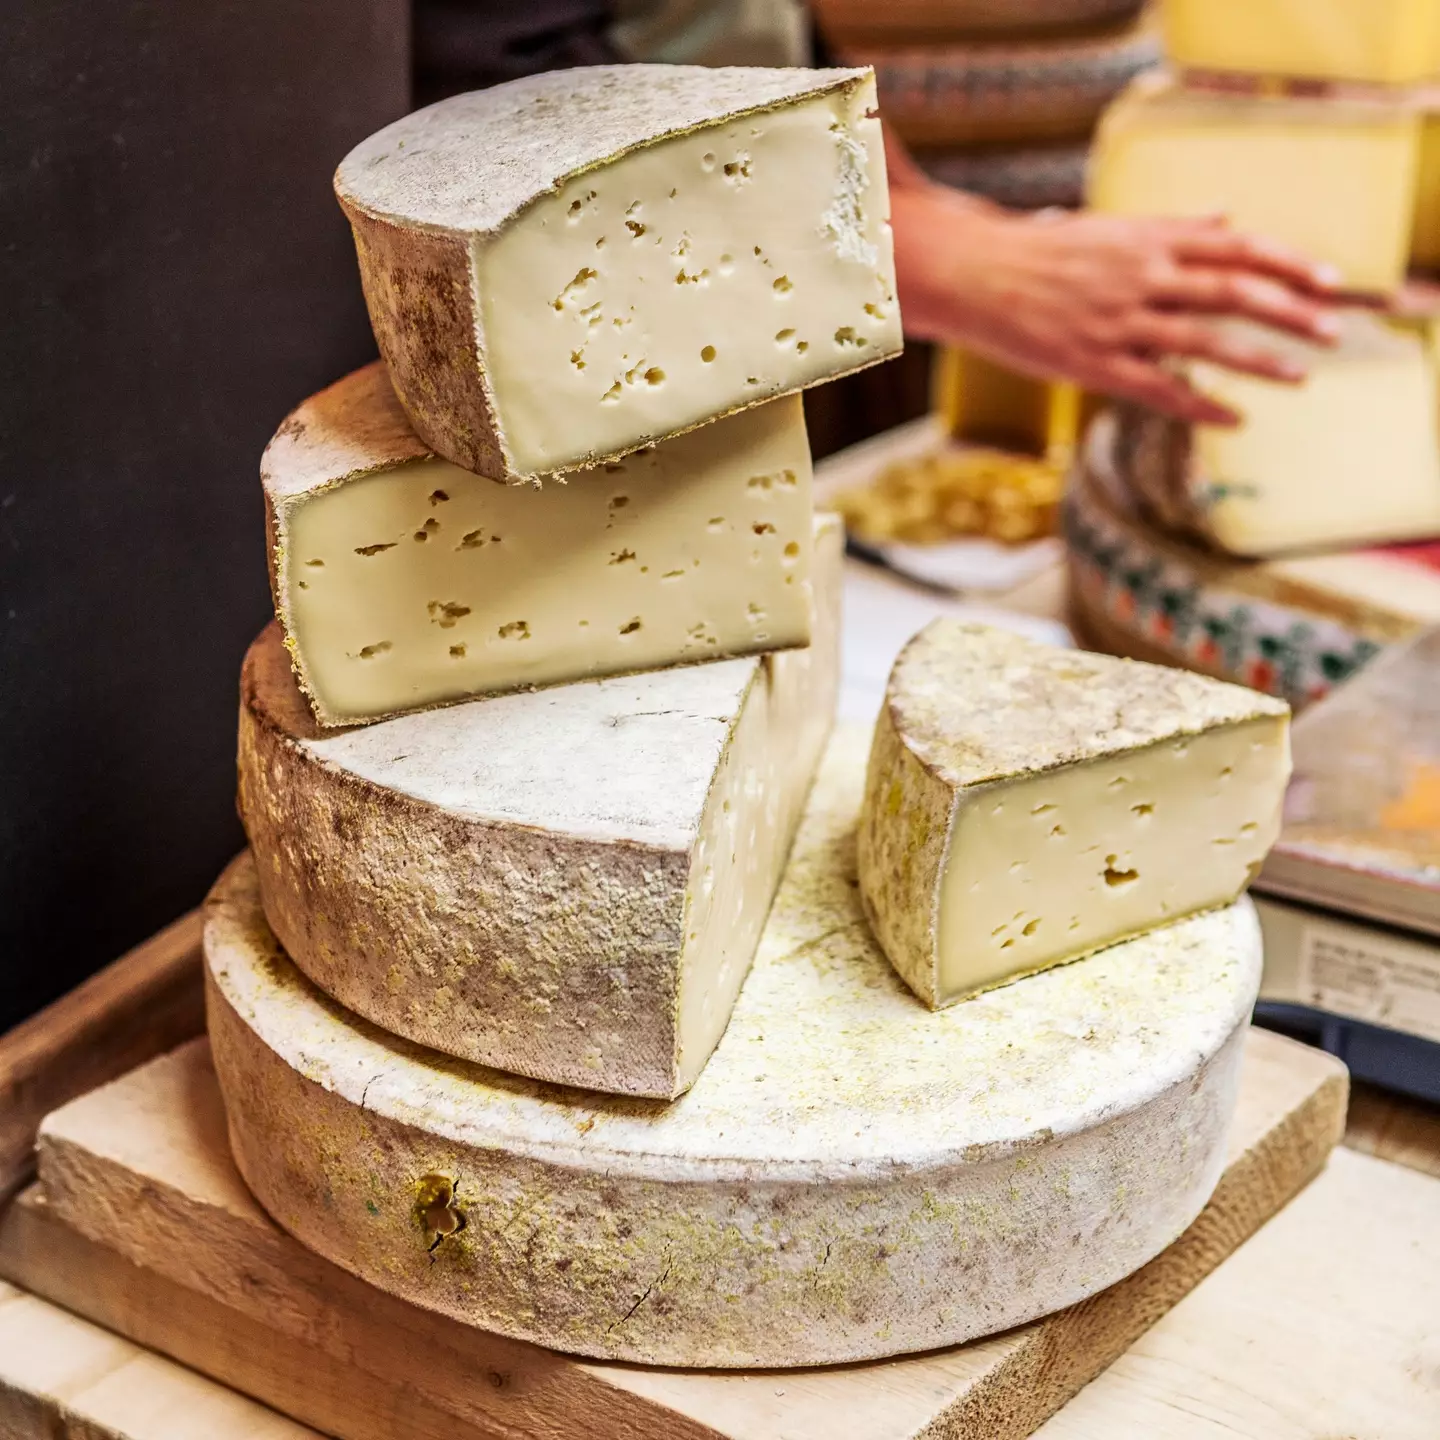 Consumers are being advised to check cheese they might have been gifted over Christmas.